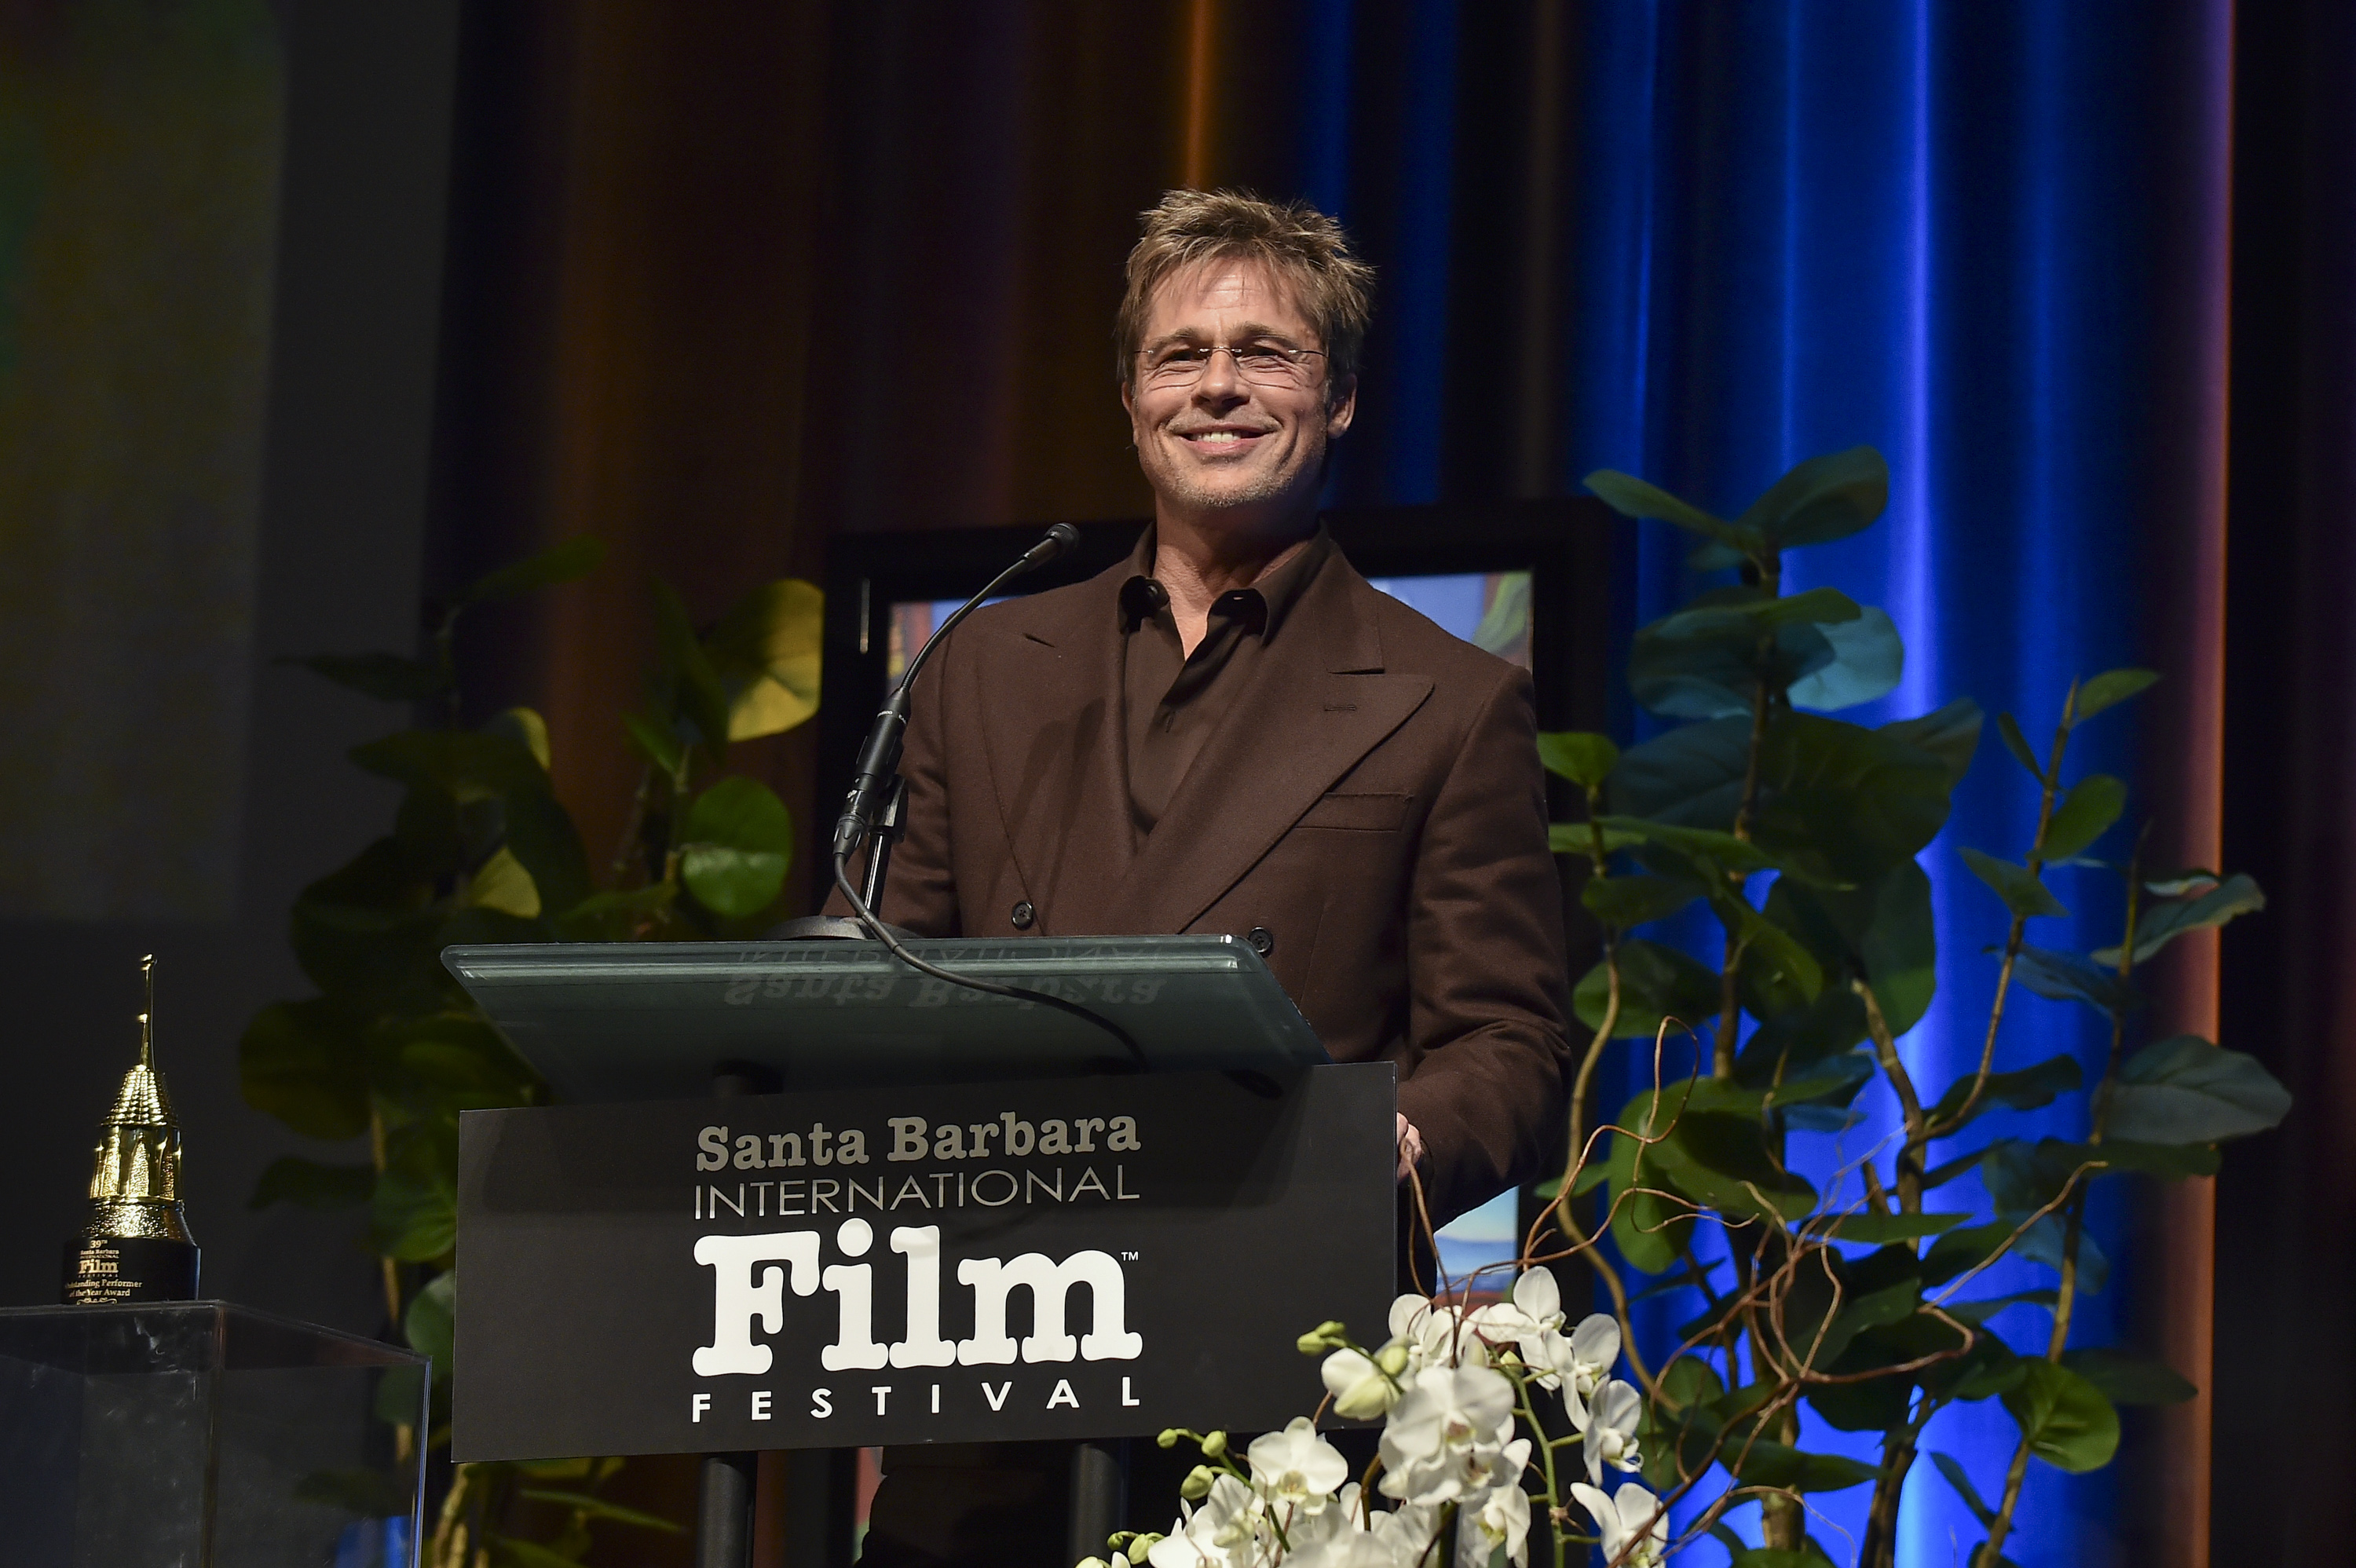 Brad Pitt during the Santa Barbara International Film Festival Outstanding Performer of the Year Award at The Arlington Theatre on February 8, 2024, in Santa Barbara, California. | Source: Getty Images